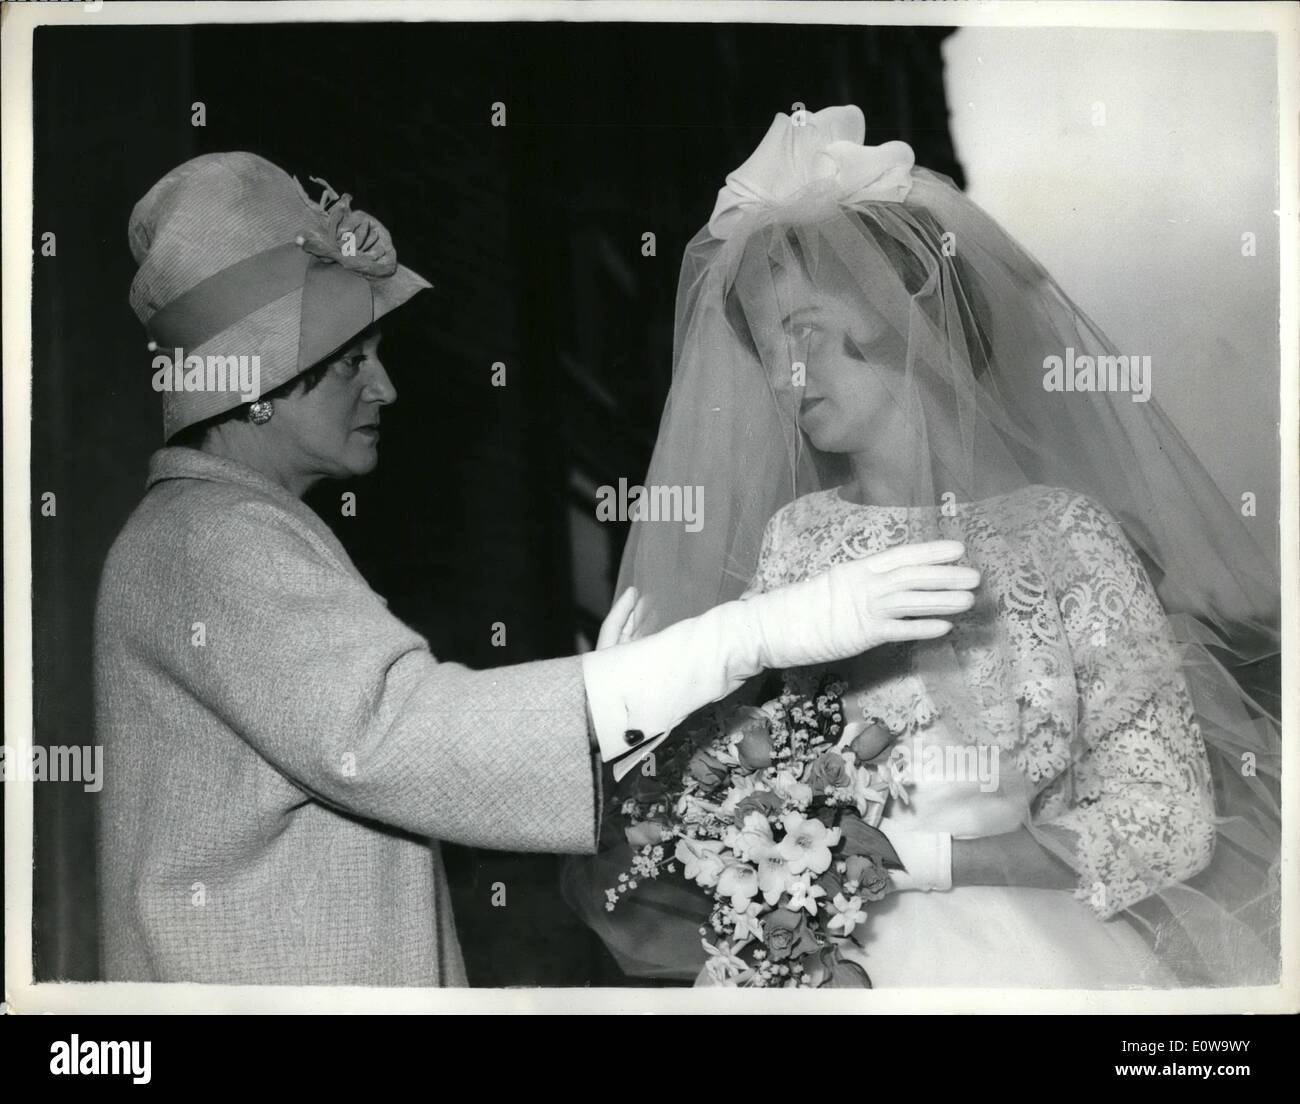 Apr. 04, 1962 - Odette's Marianne Marries Today: The marriage of Marianne Sanson, youngest daughter of George Cross heroine Mrs. Geoffrey M. Hallowes - Formerly Odette Sanson, the French Resistance heroine - to Michael Bates, of Guildford, took place this afternoon at the French Church, London. Photo Shows The bride's mother adjusts her daughter's headdress before the wedding today. Stock Photo